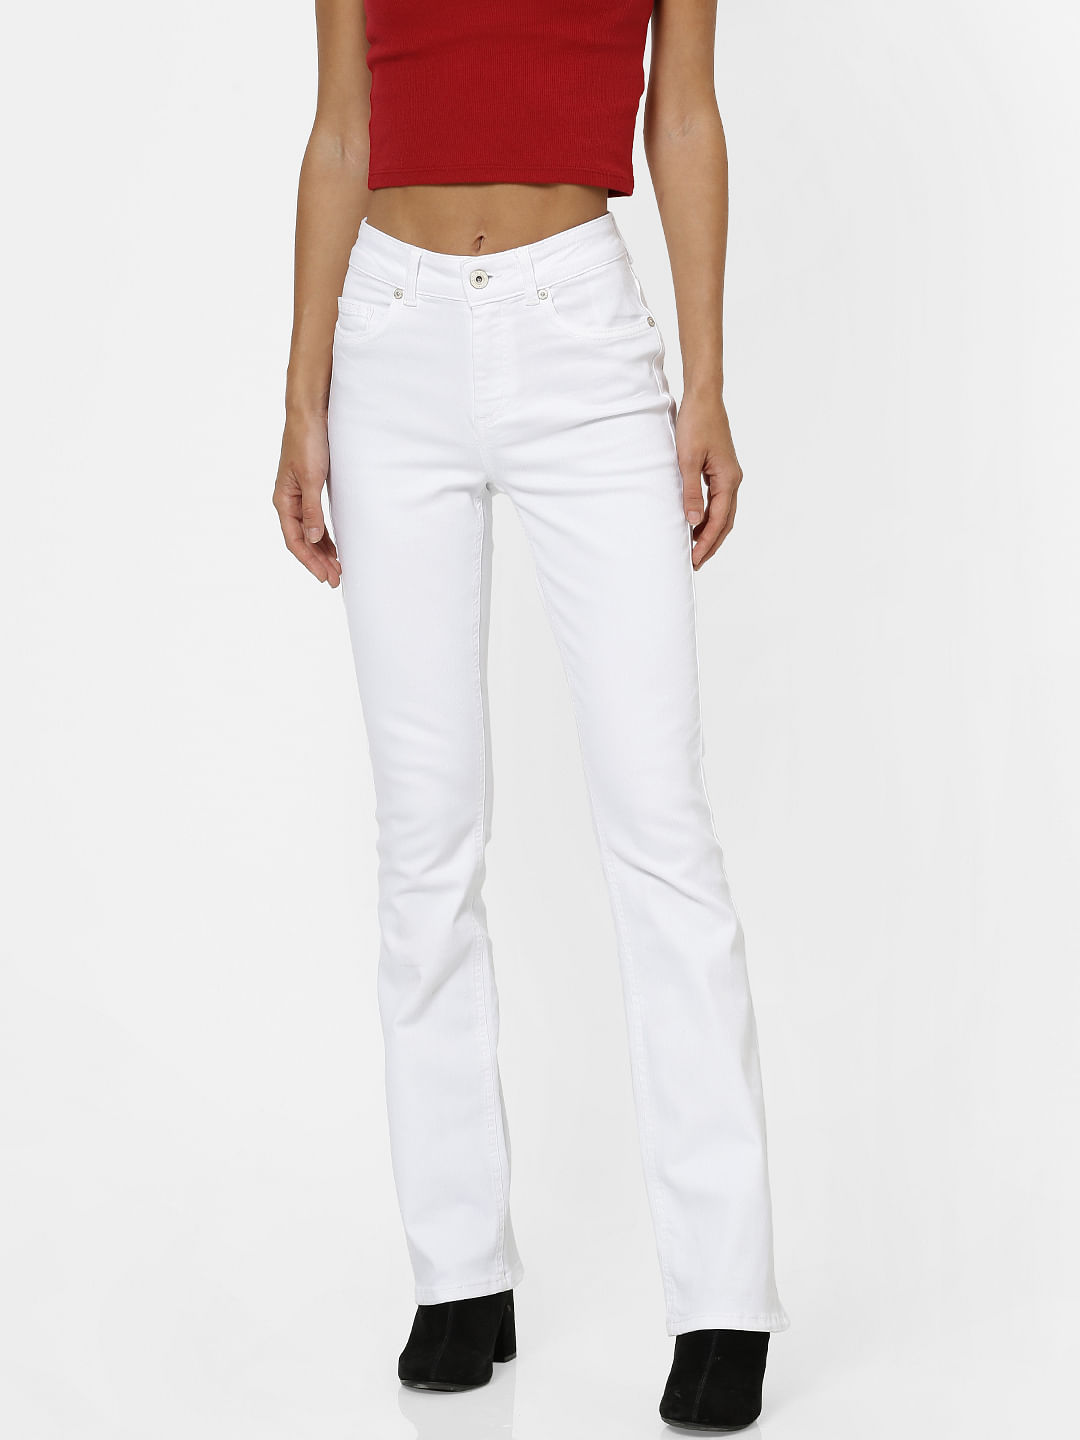 Buy PODGE Mens Slim Fit White Jeans Online at Best Prices in India   JioMart